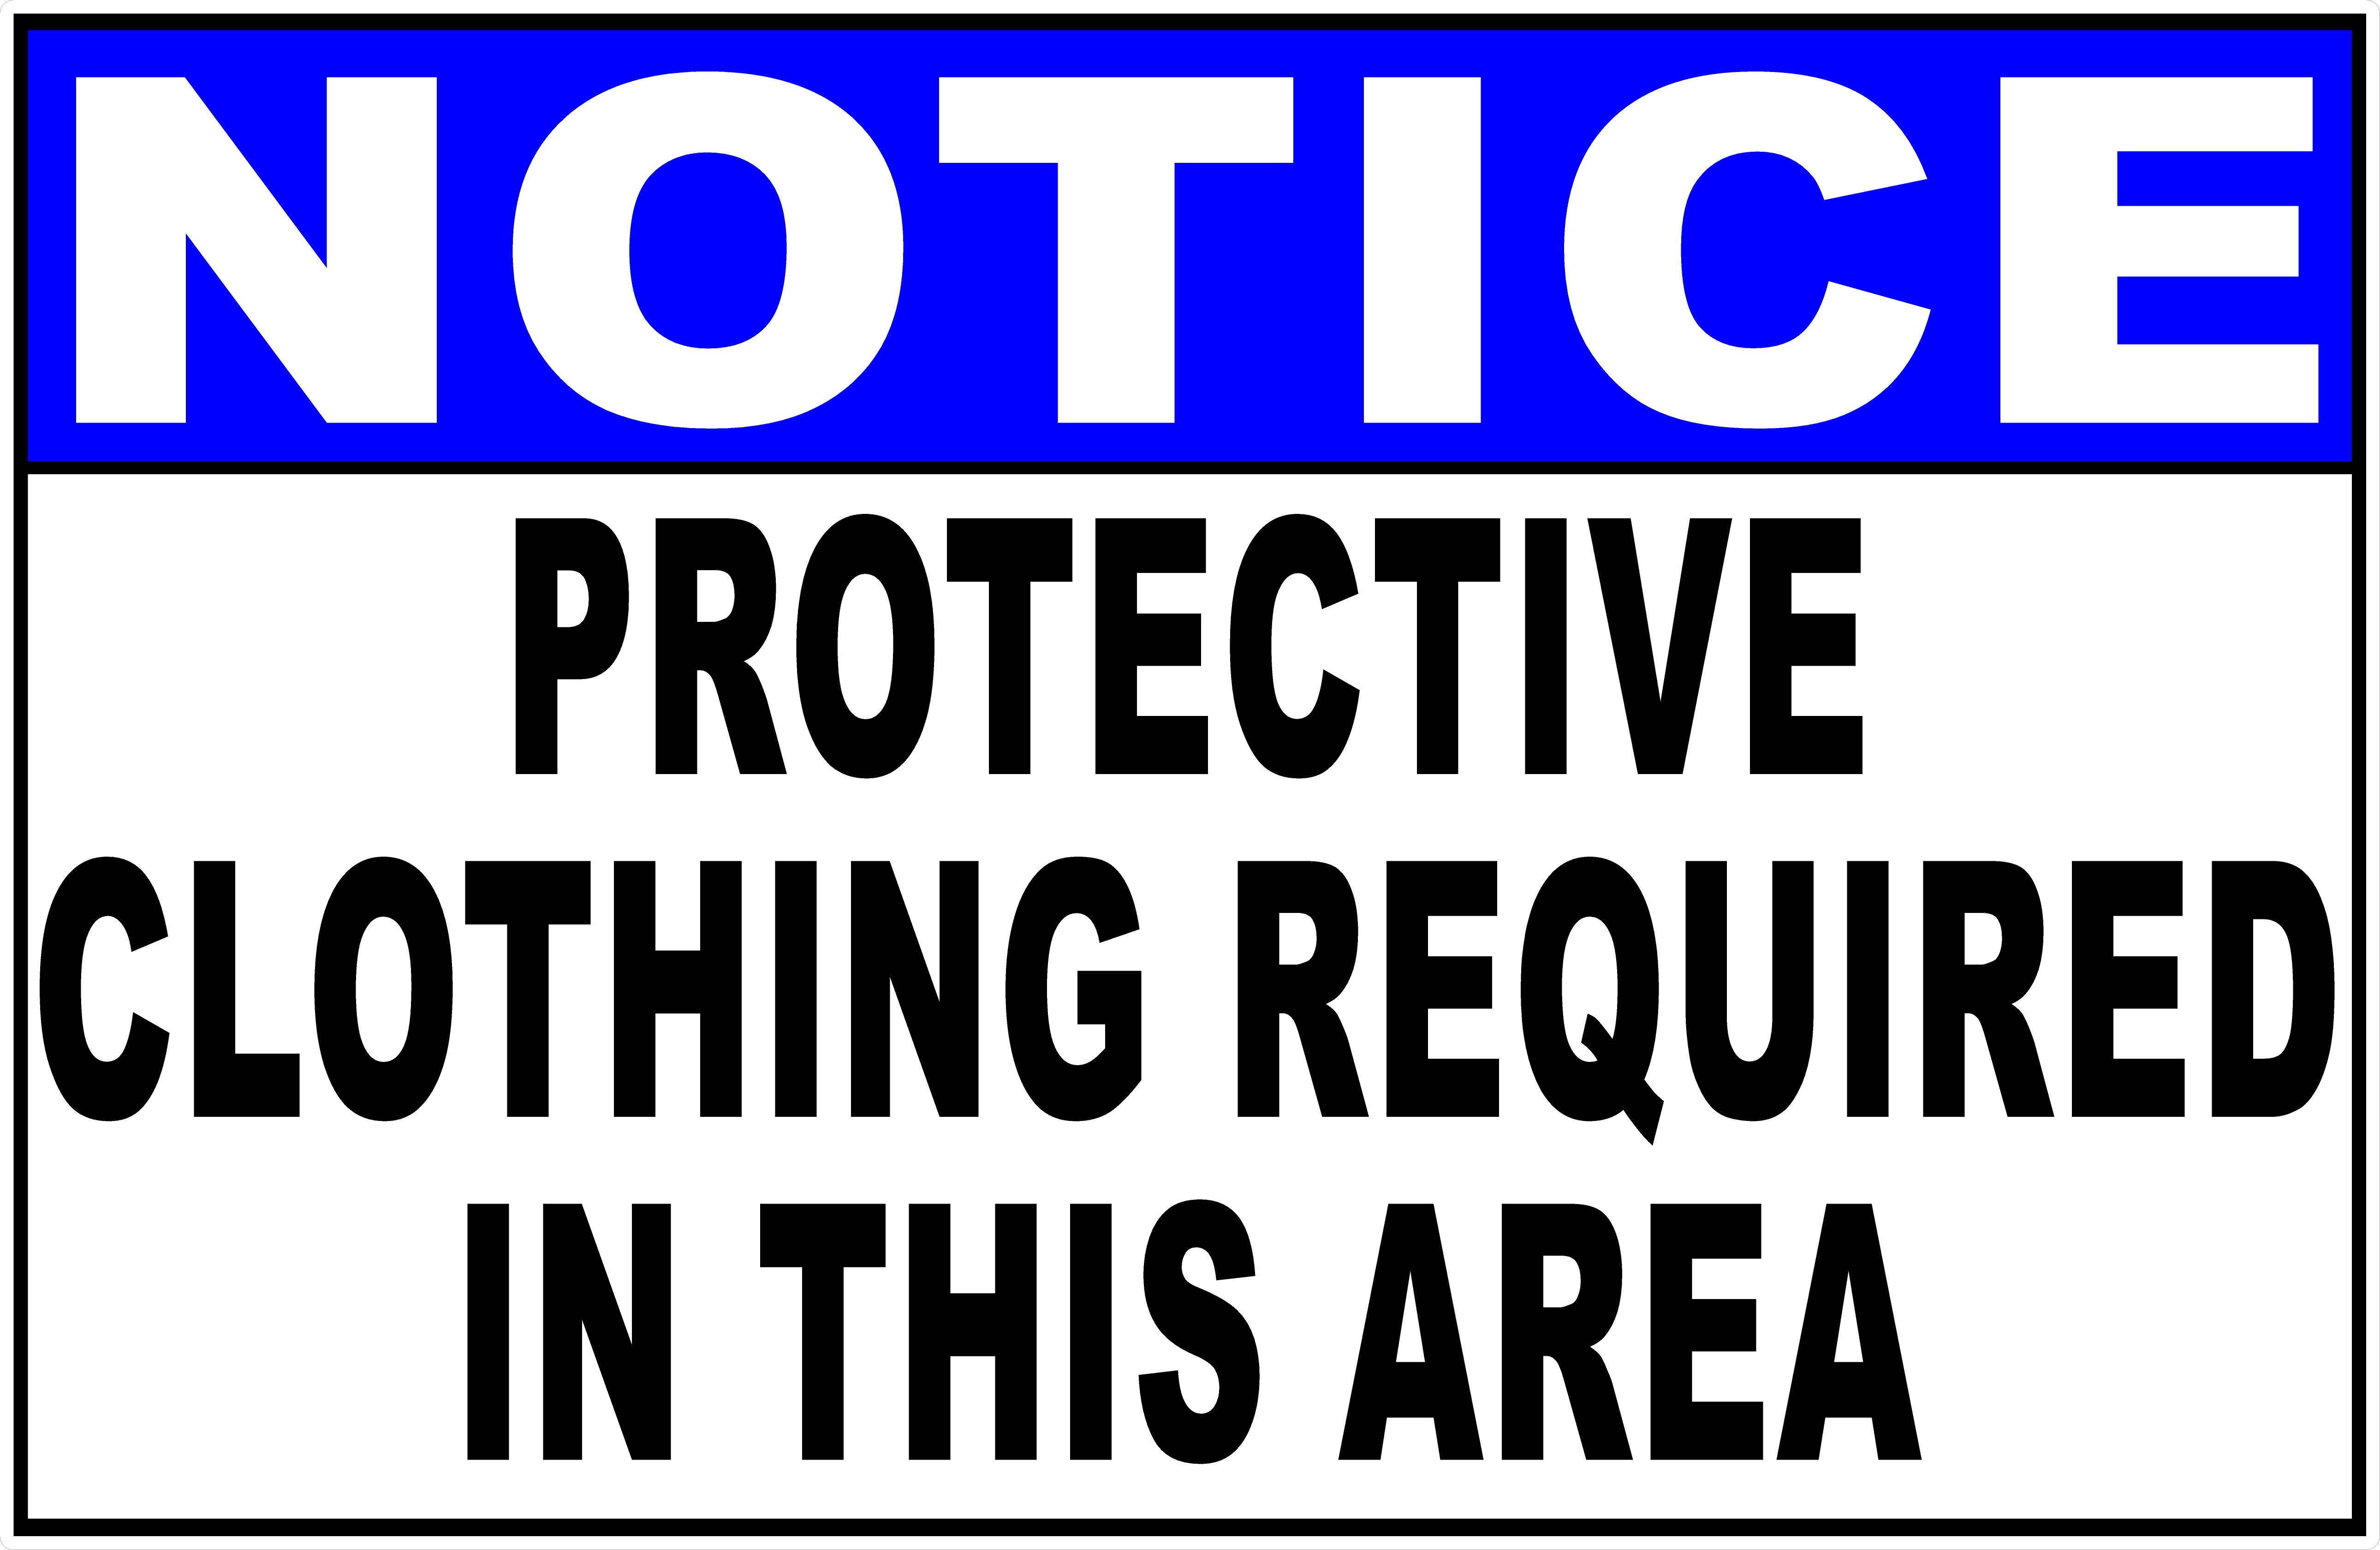 Protective Clothing Must Be Worn In This Area Symbol Signs